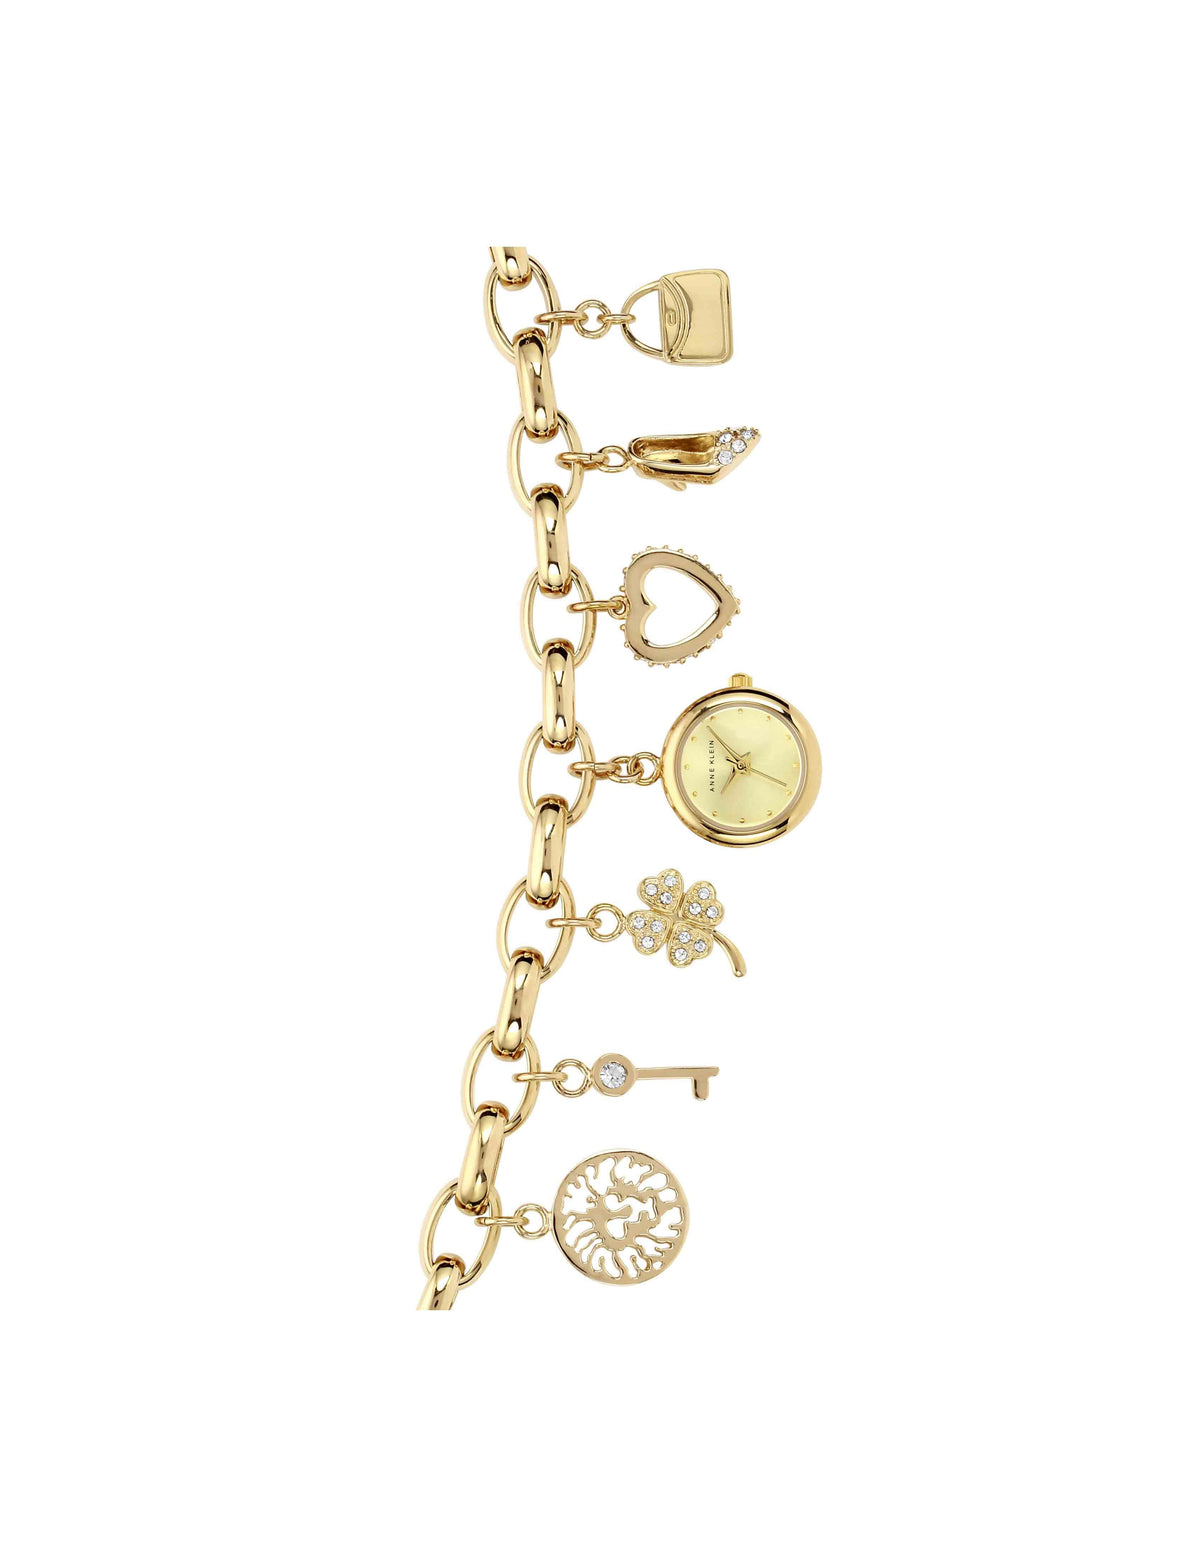 Anne Klein Gold-Tone Crystal Accented Charm Bracelet Watch